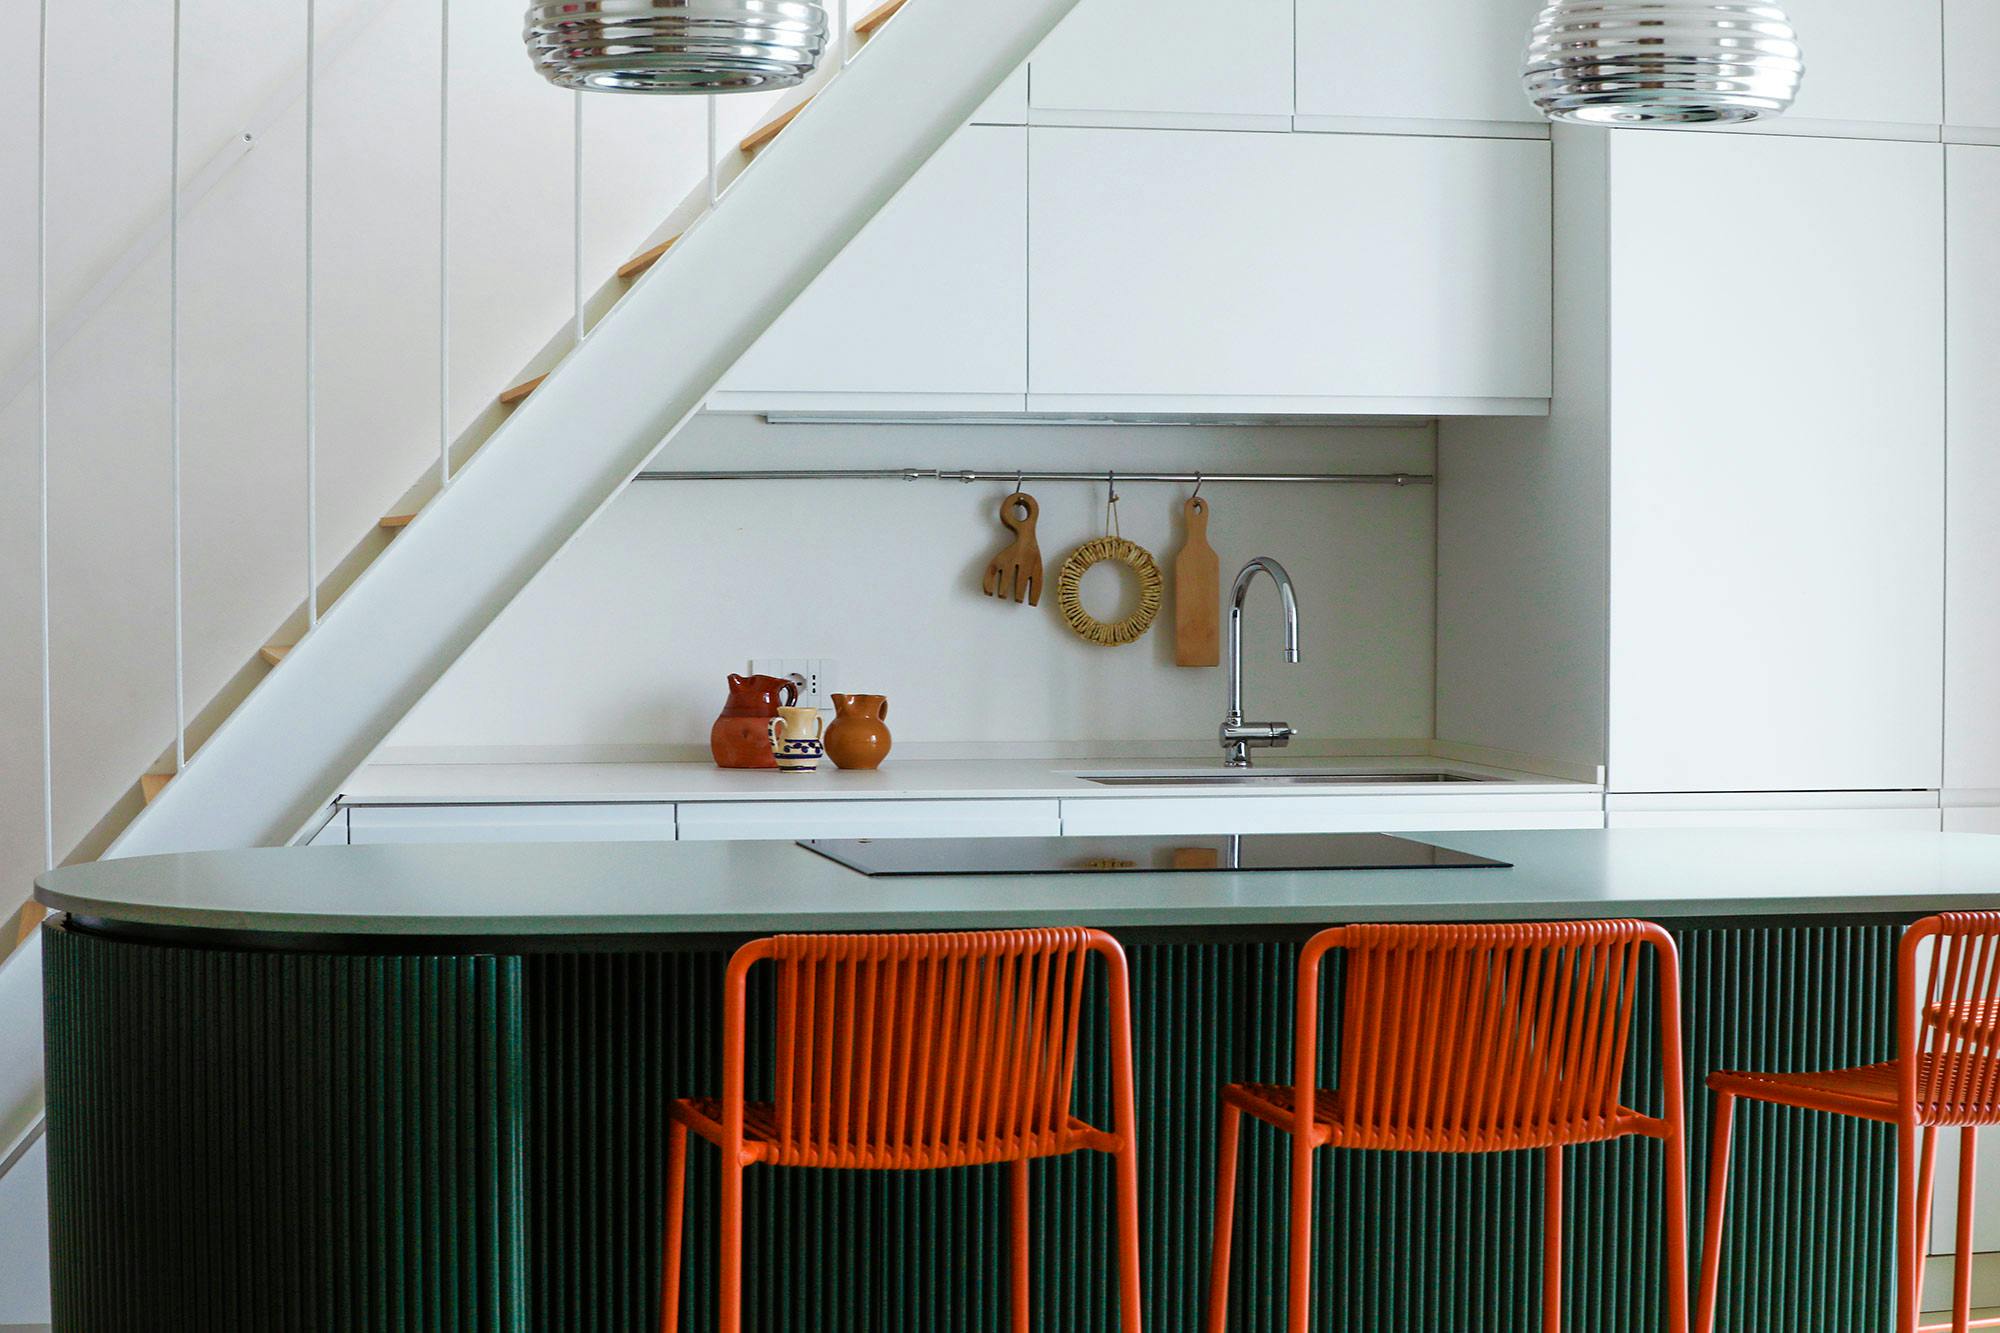 Imagem número 32 da actual secção de {{A functional kitchen under the stairs to make the most of space without compromising on design}} da Cosentino Portugal